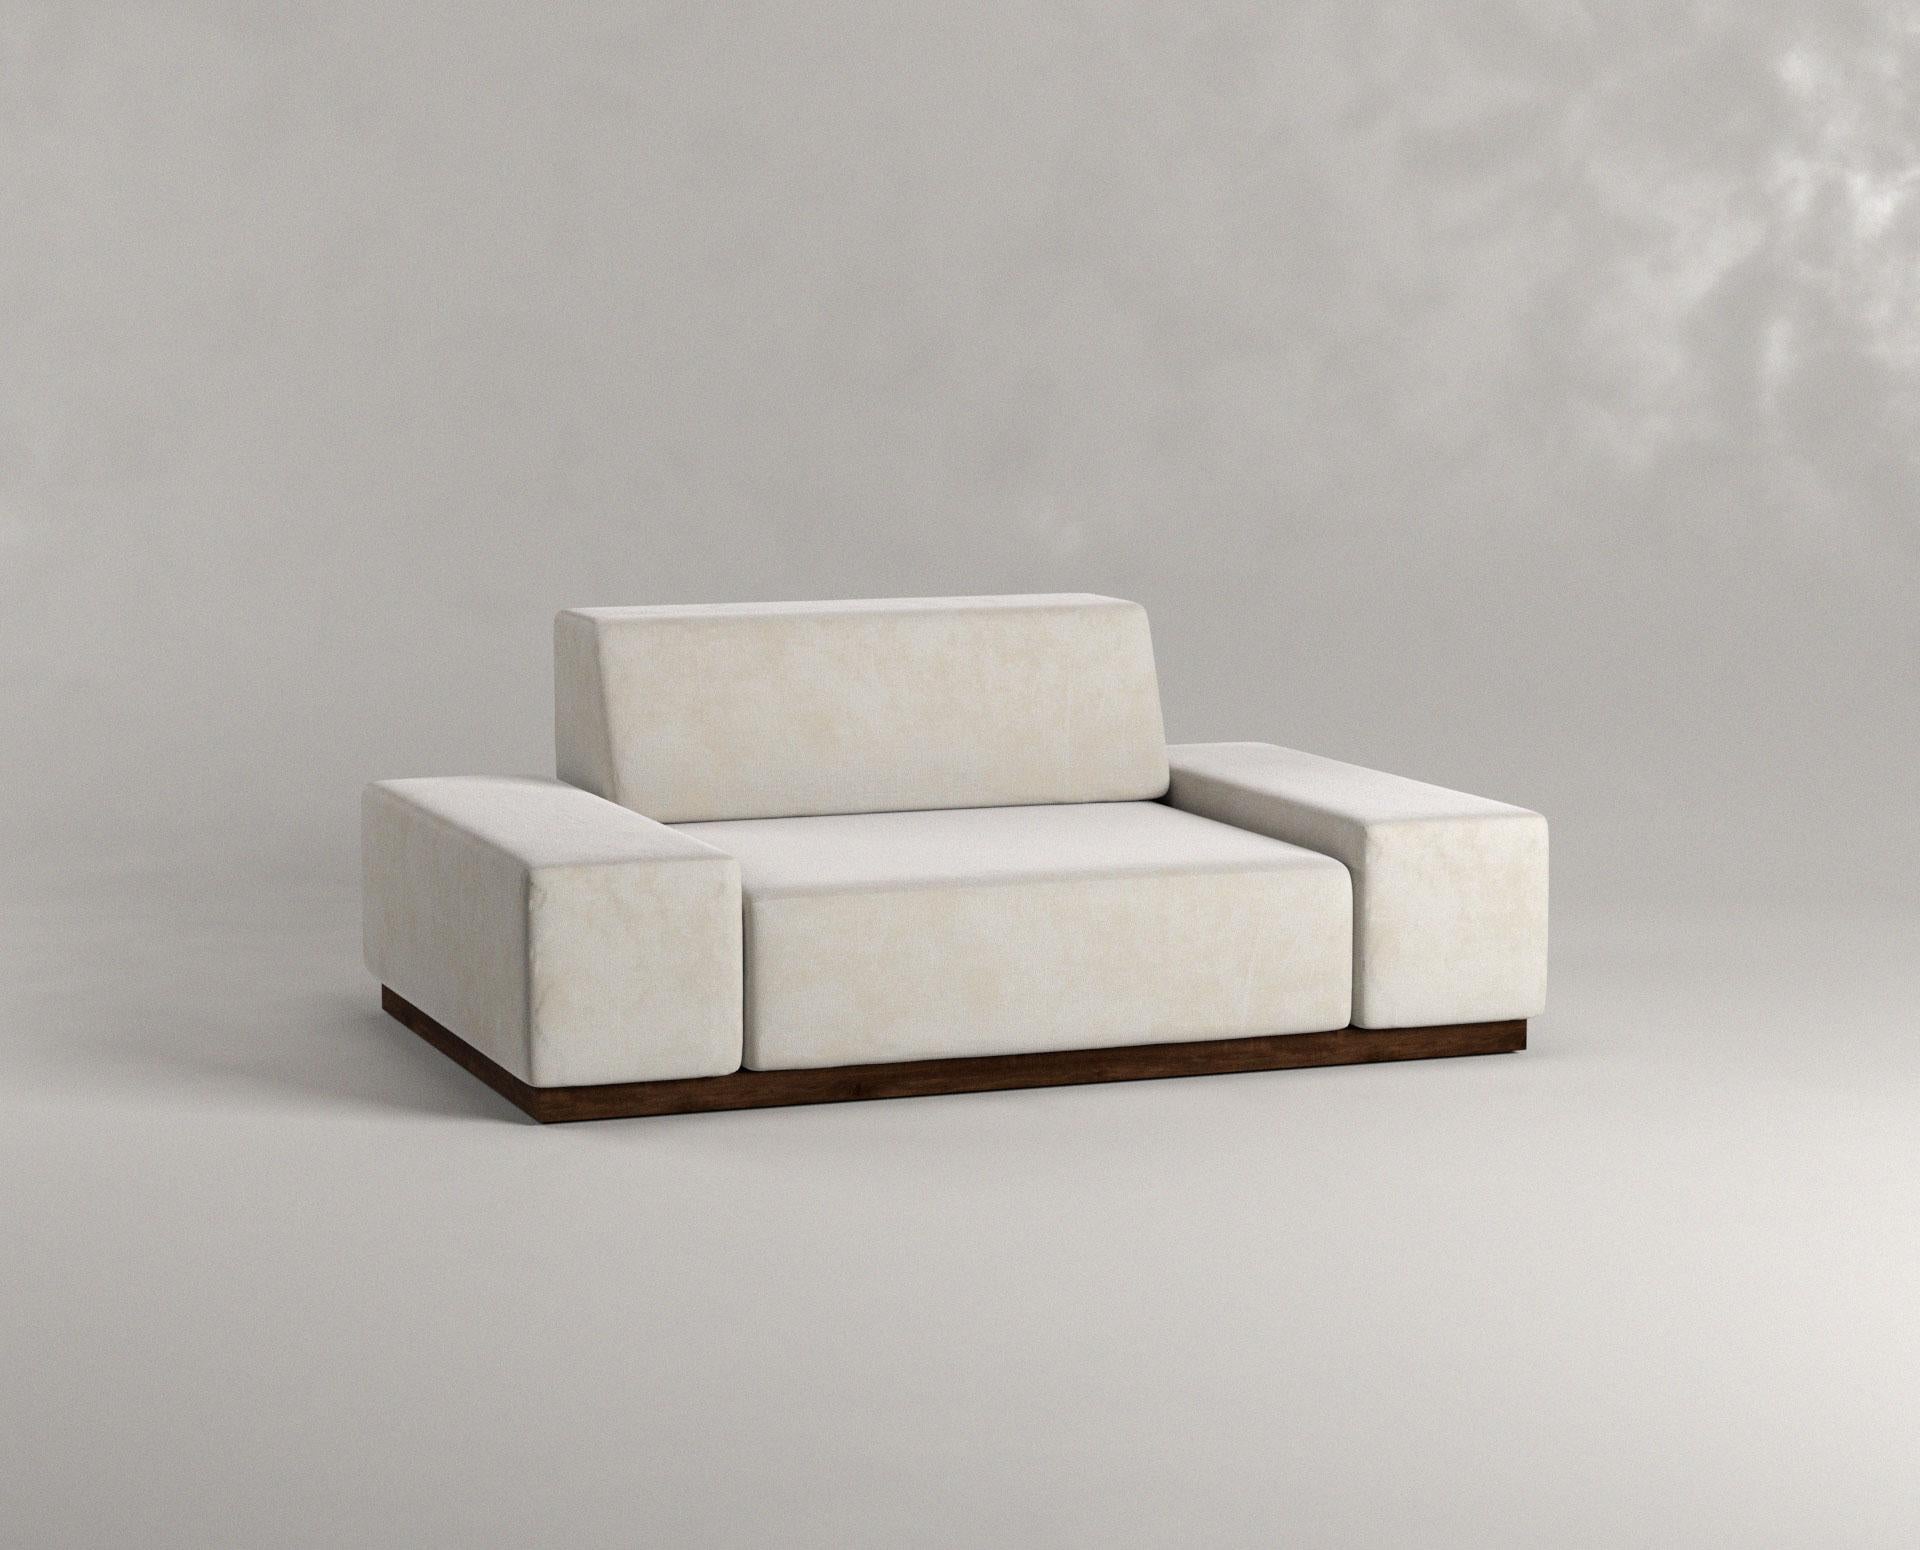 Mexican Olive Two Seater Nube Sofa by Siete Studio For Sale